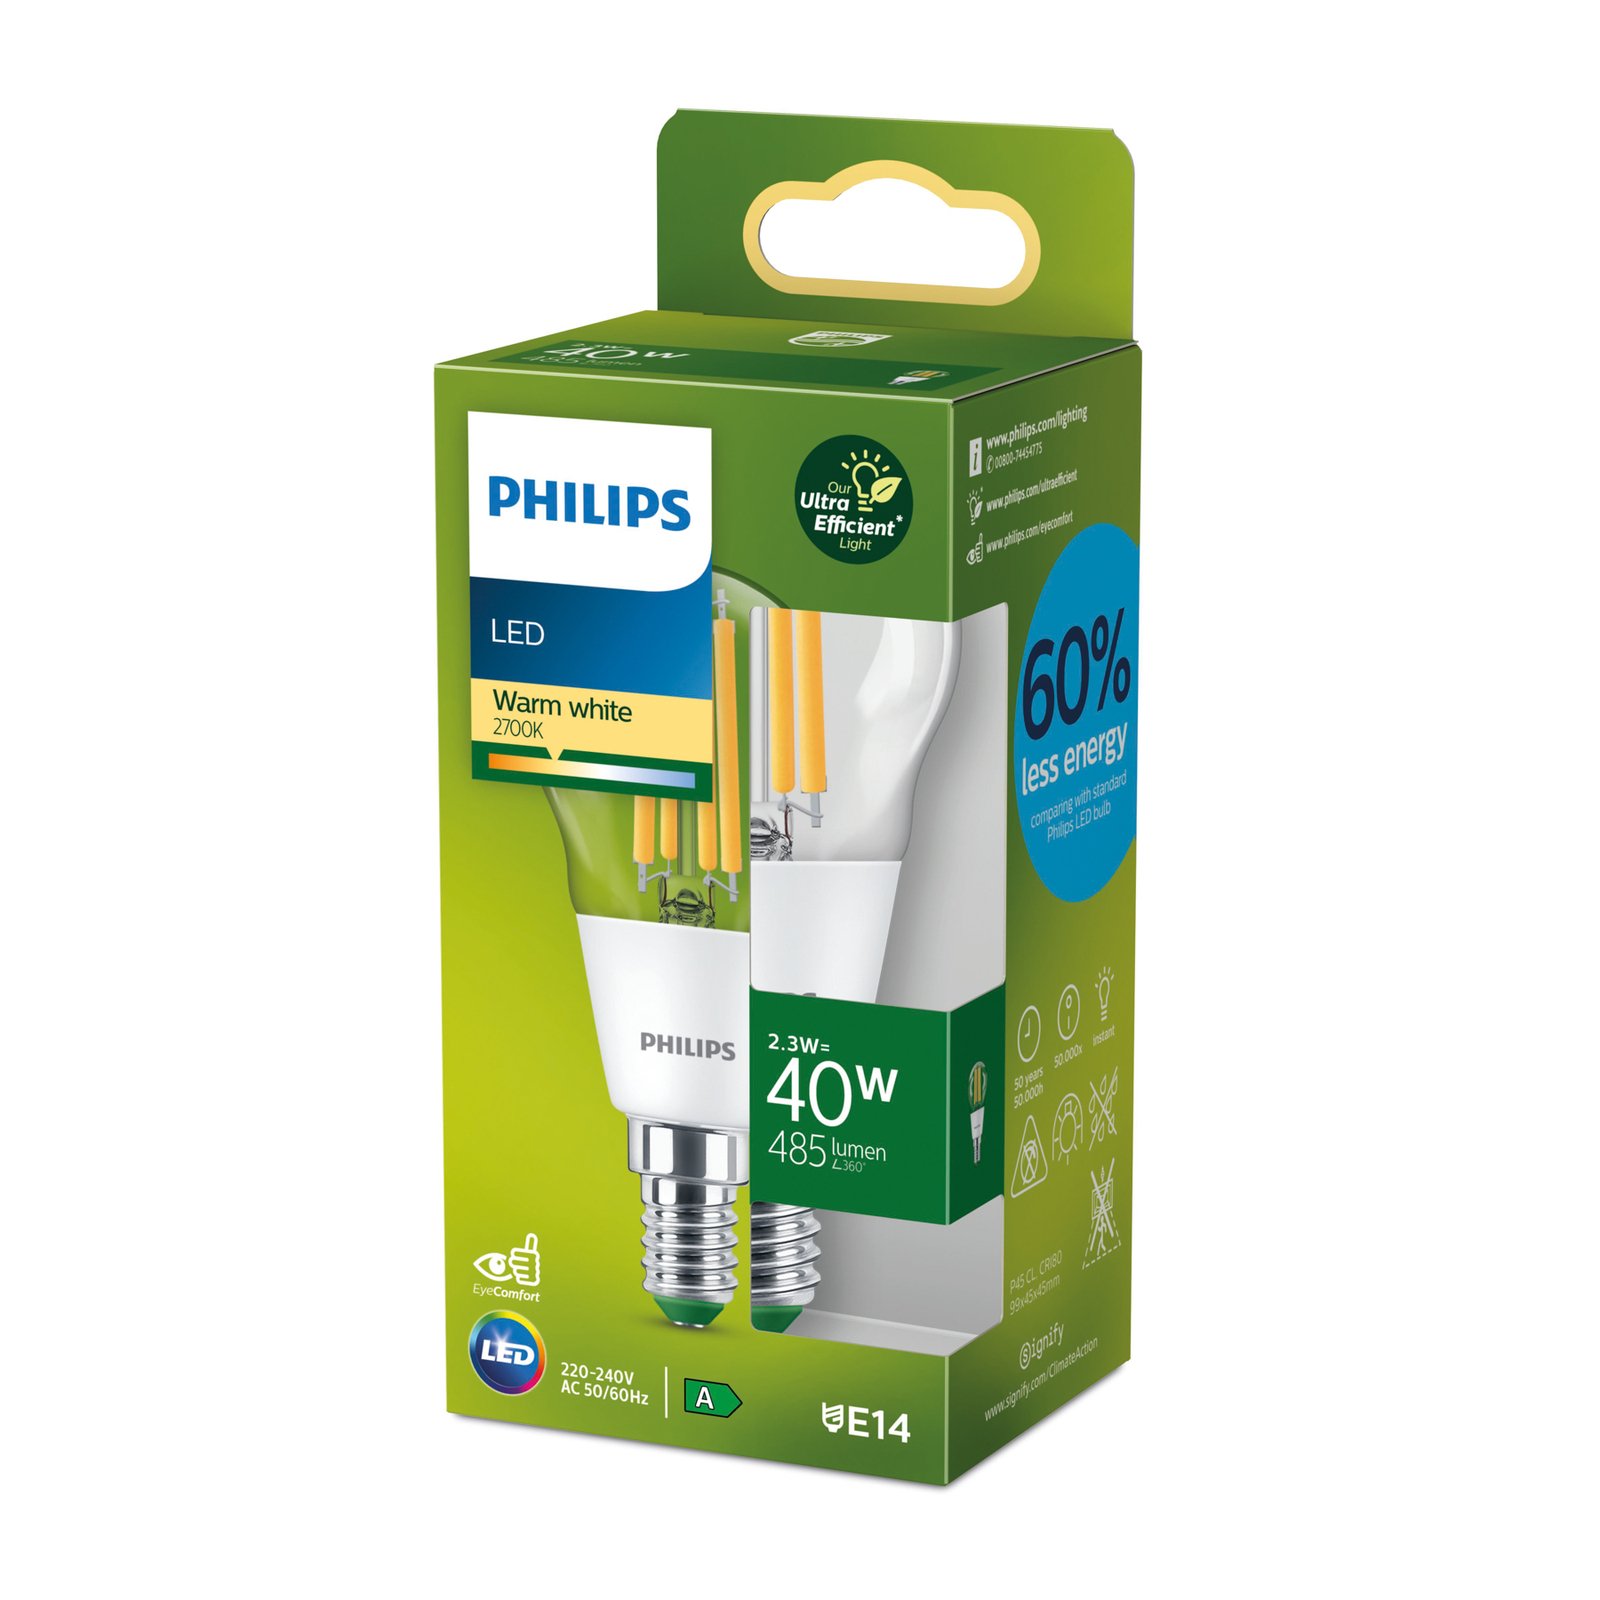 Philips E14 LED G45 2,3W 485lm 2 700K claire